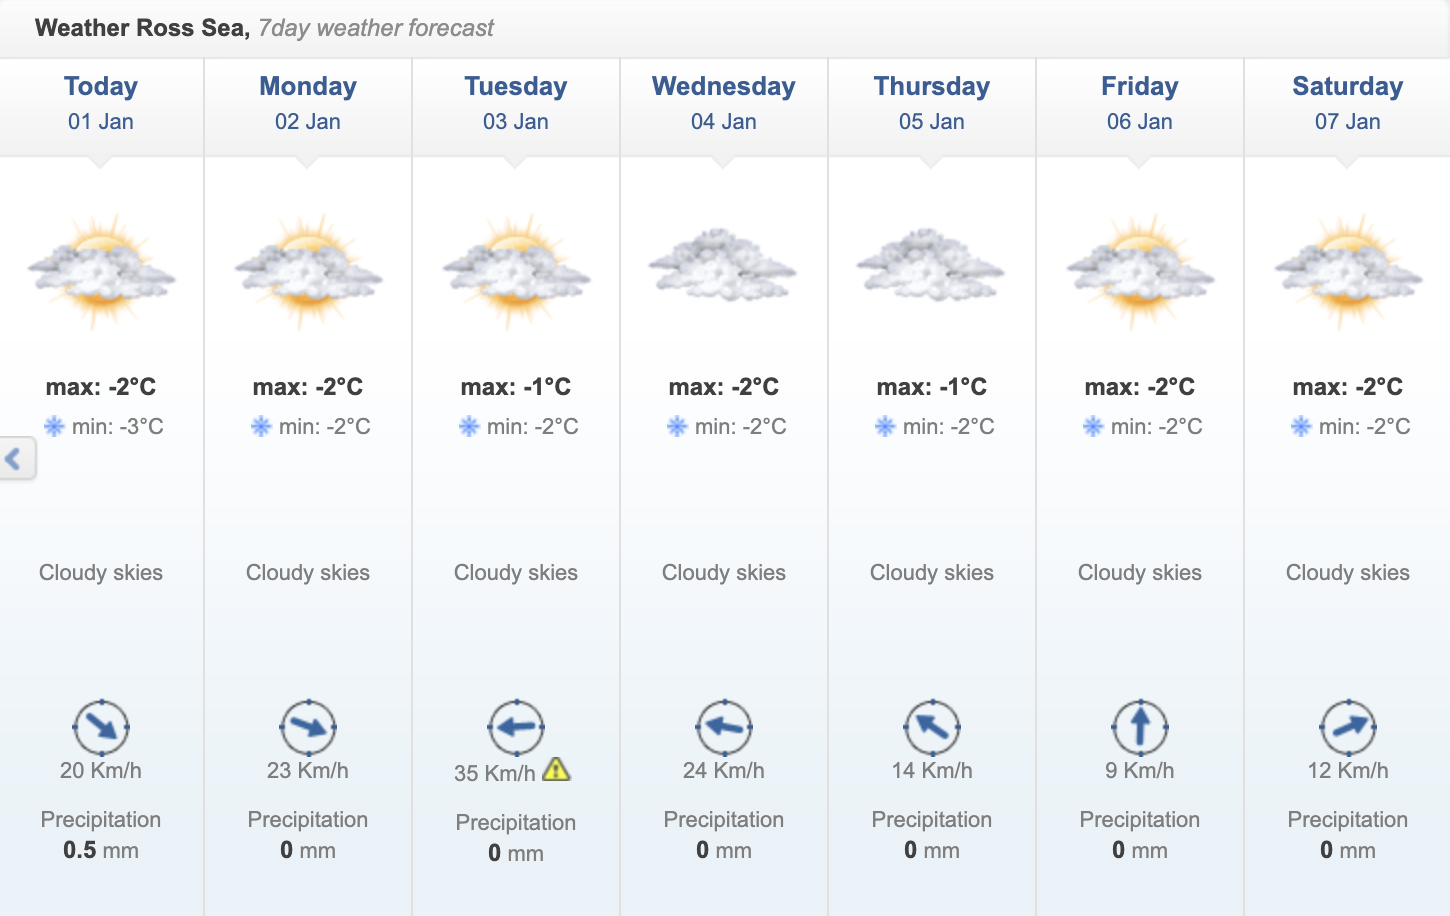 7-day weather forecast for the Ross Sea